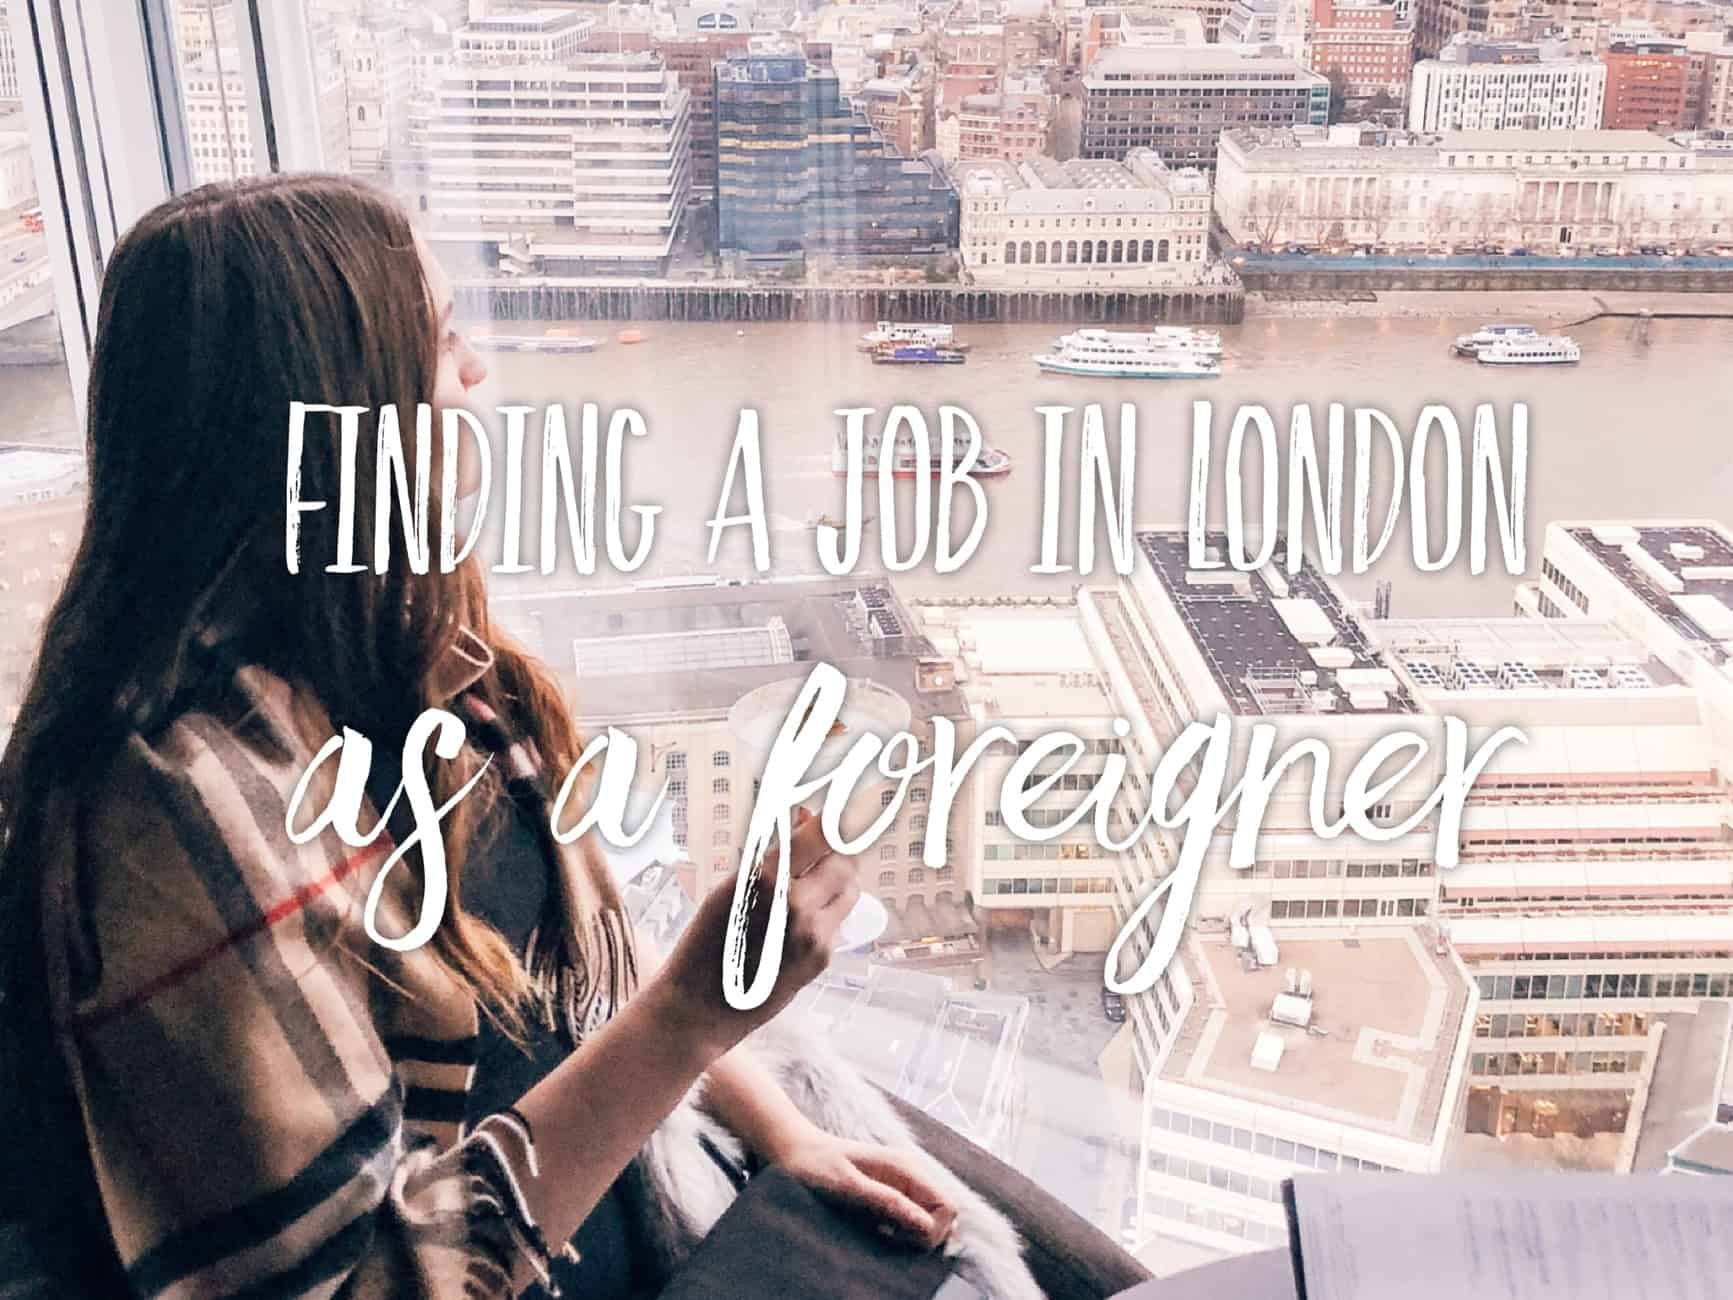 How to find a job in London as a foreigner: challenge accepted